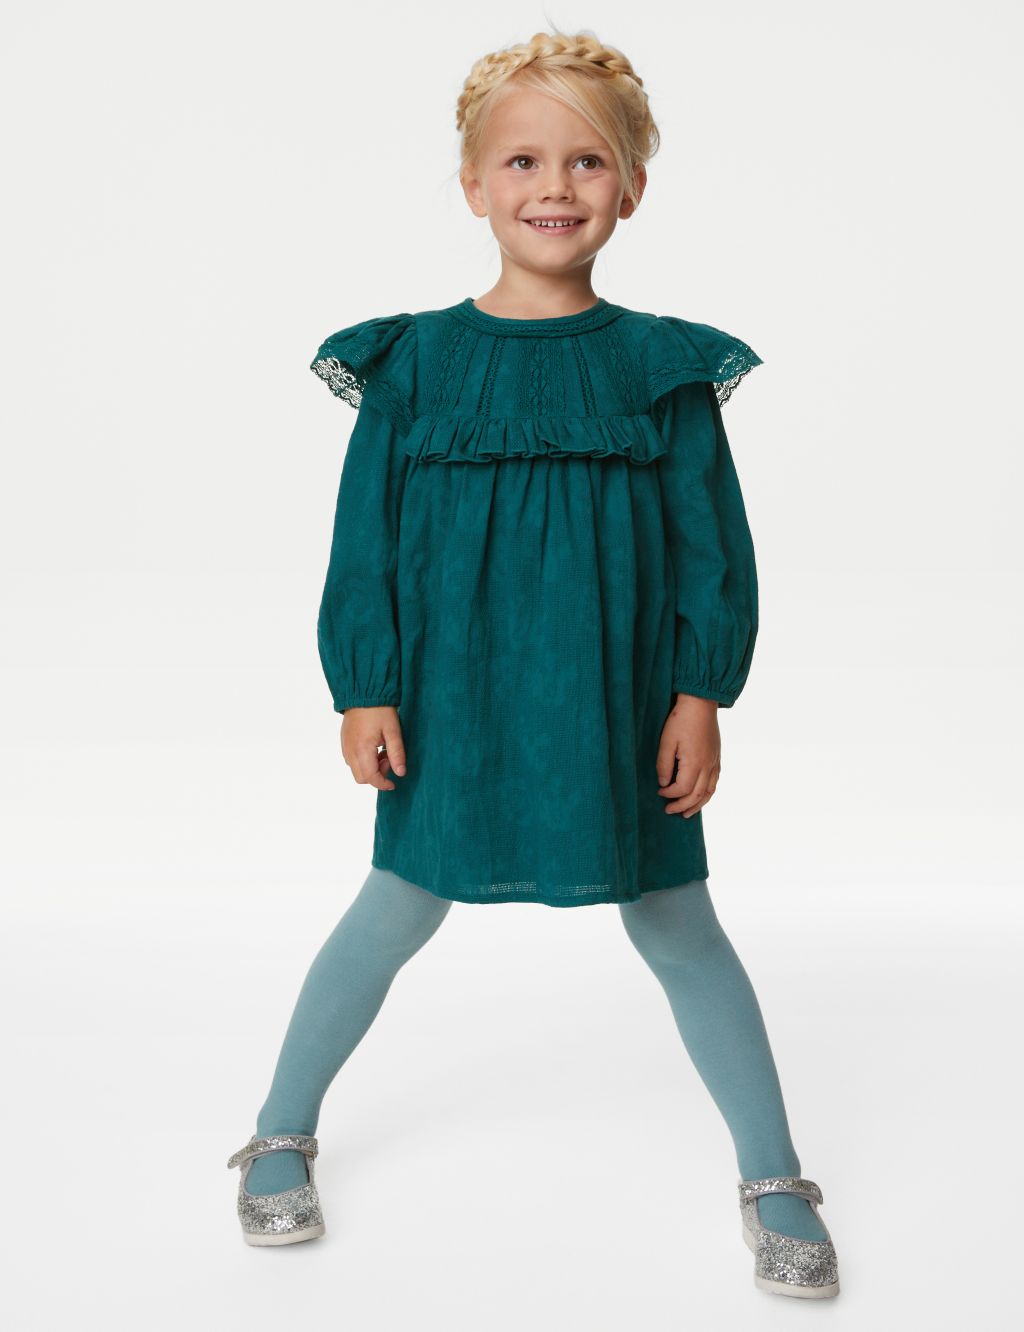 2pc Cotton Rich Dress & Tights Outfit (2-8 Yrs) image 1